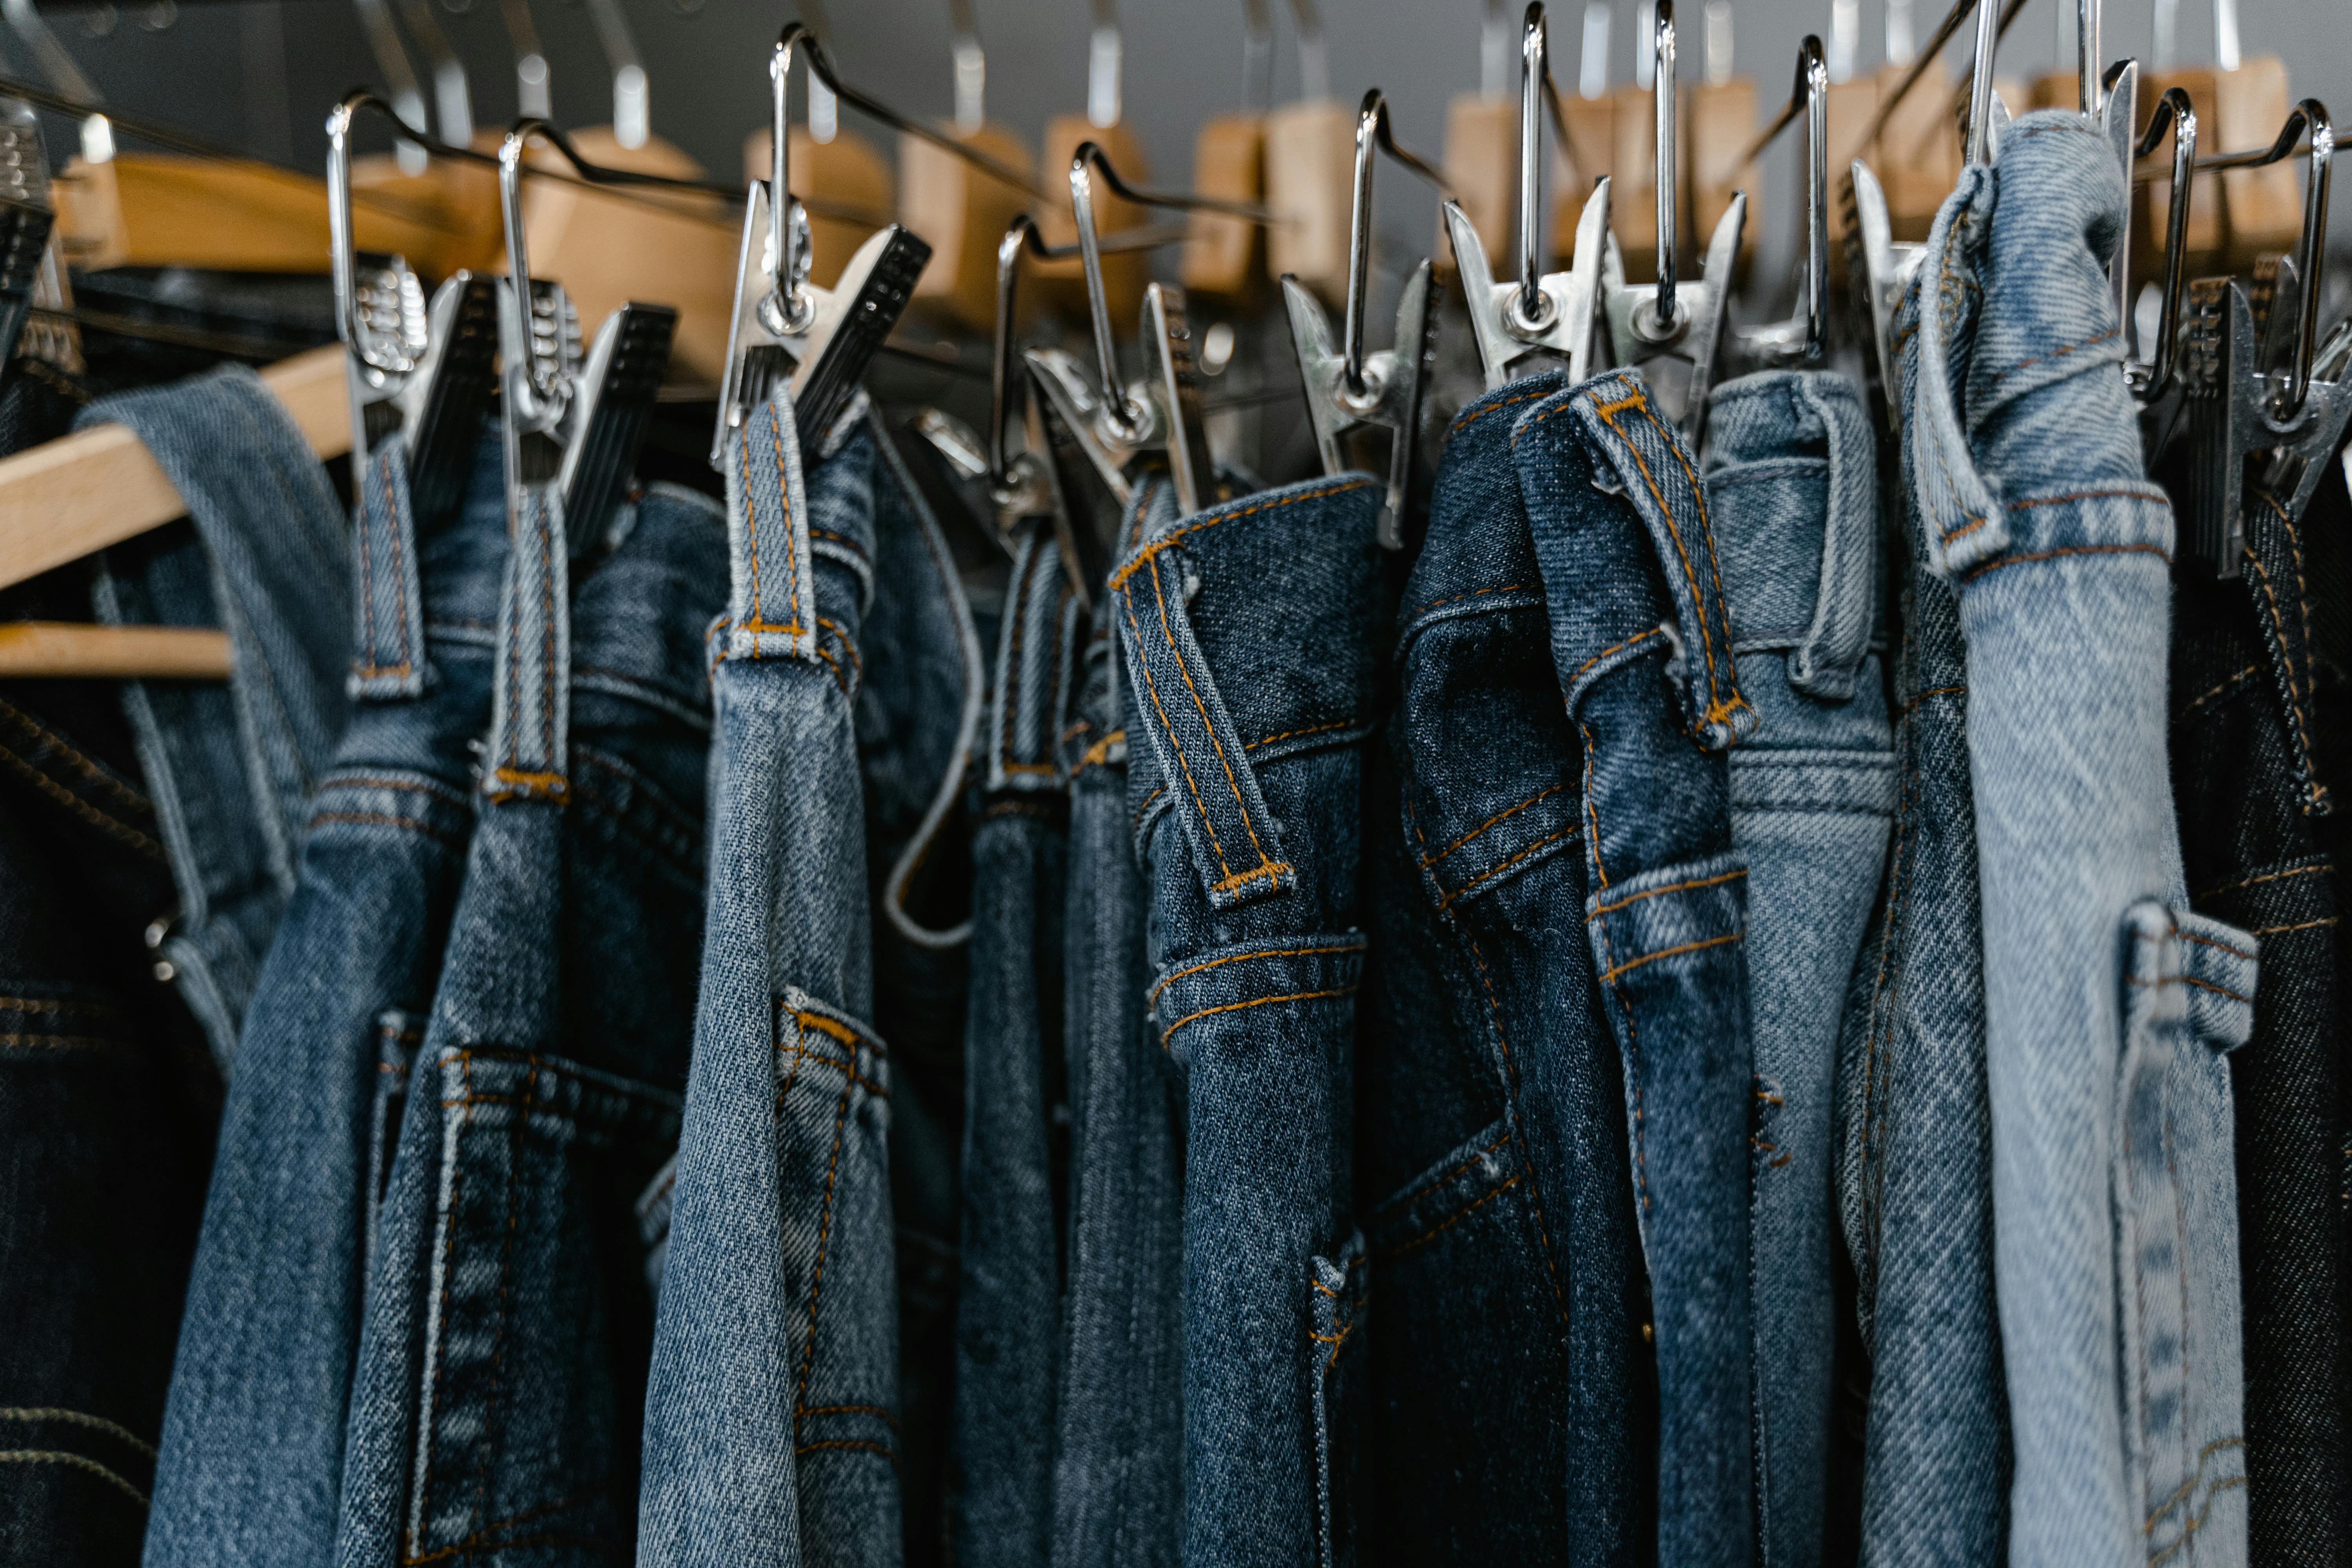 Multiple pairs of jeans hanging on a rack.